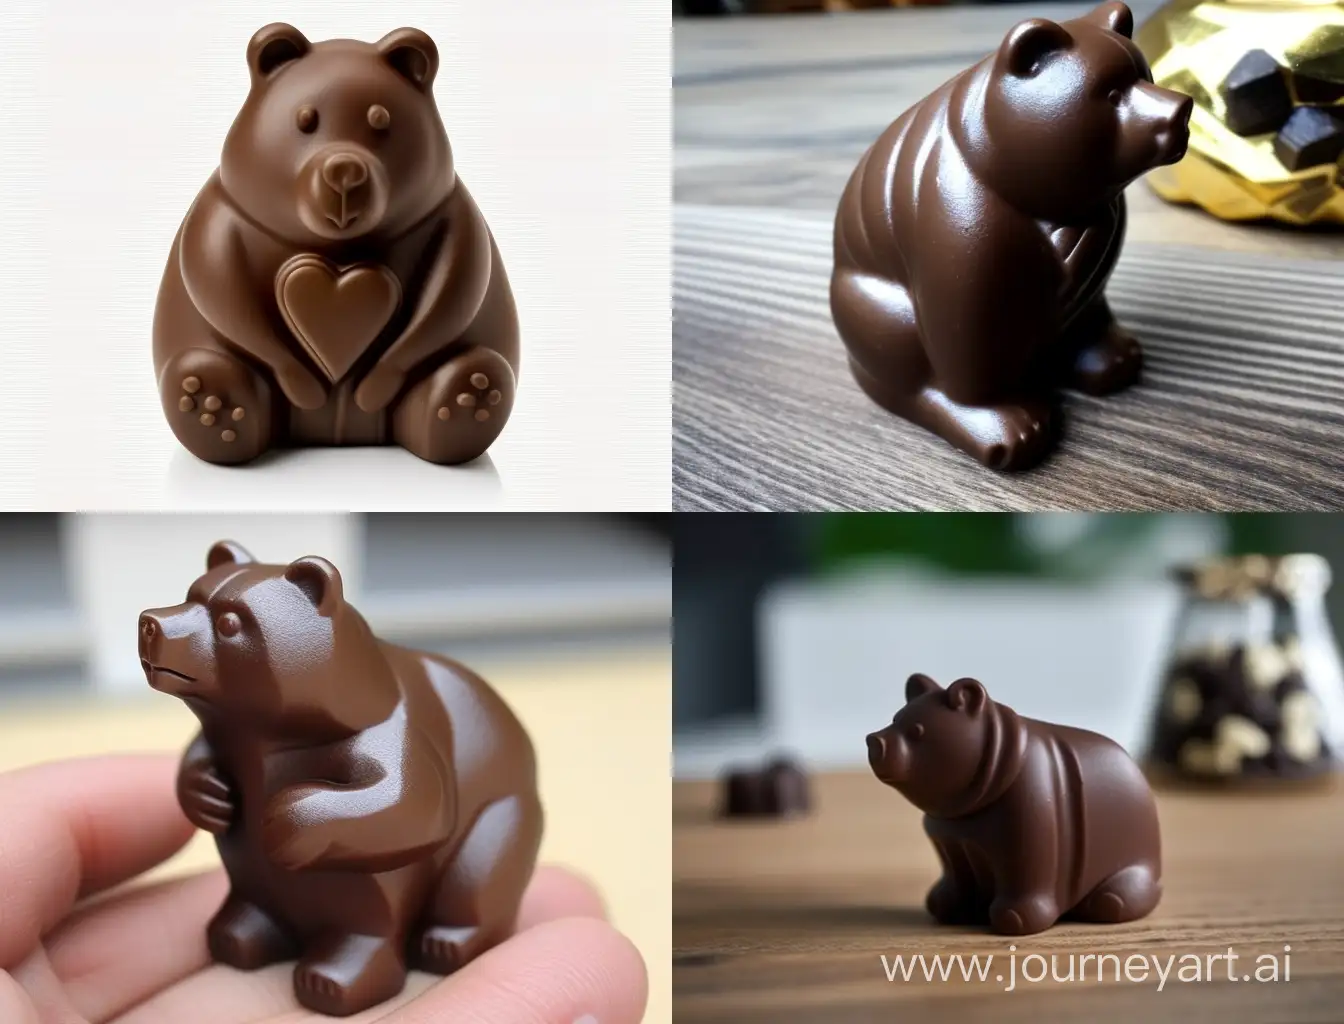 Adorable-Bearshaped-Chocolate-Delight-Irresistible-2D-Artistry-in-Every-Bite